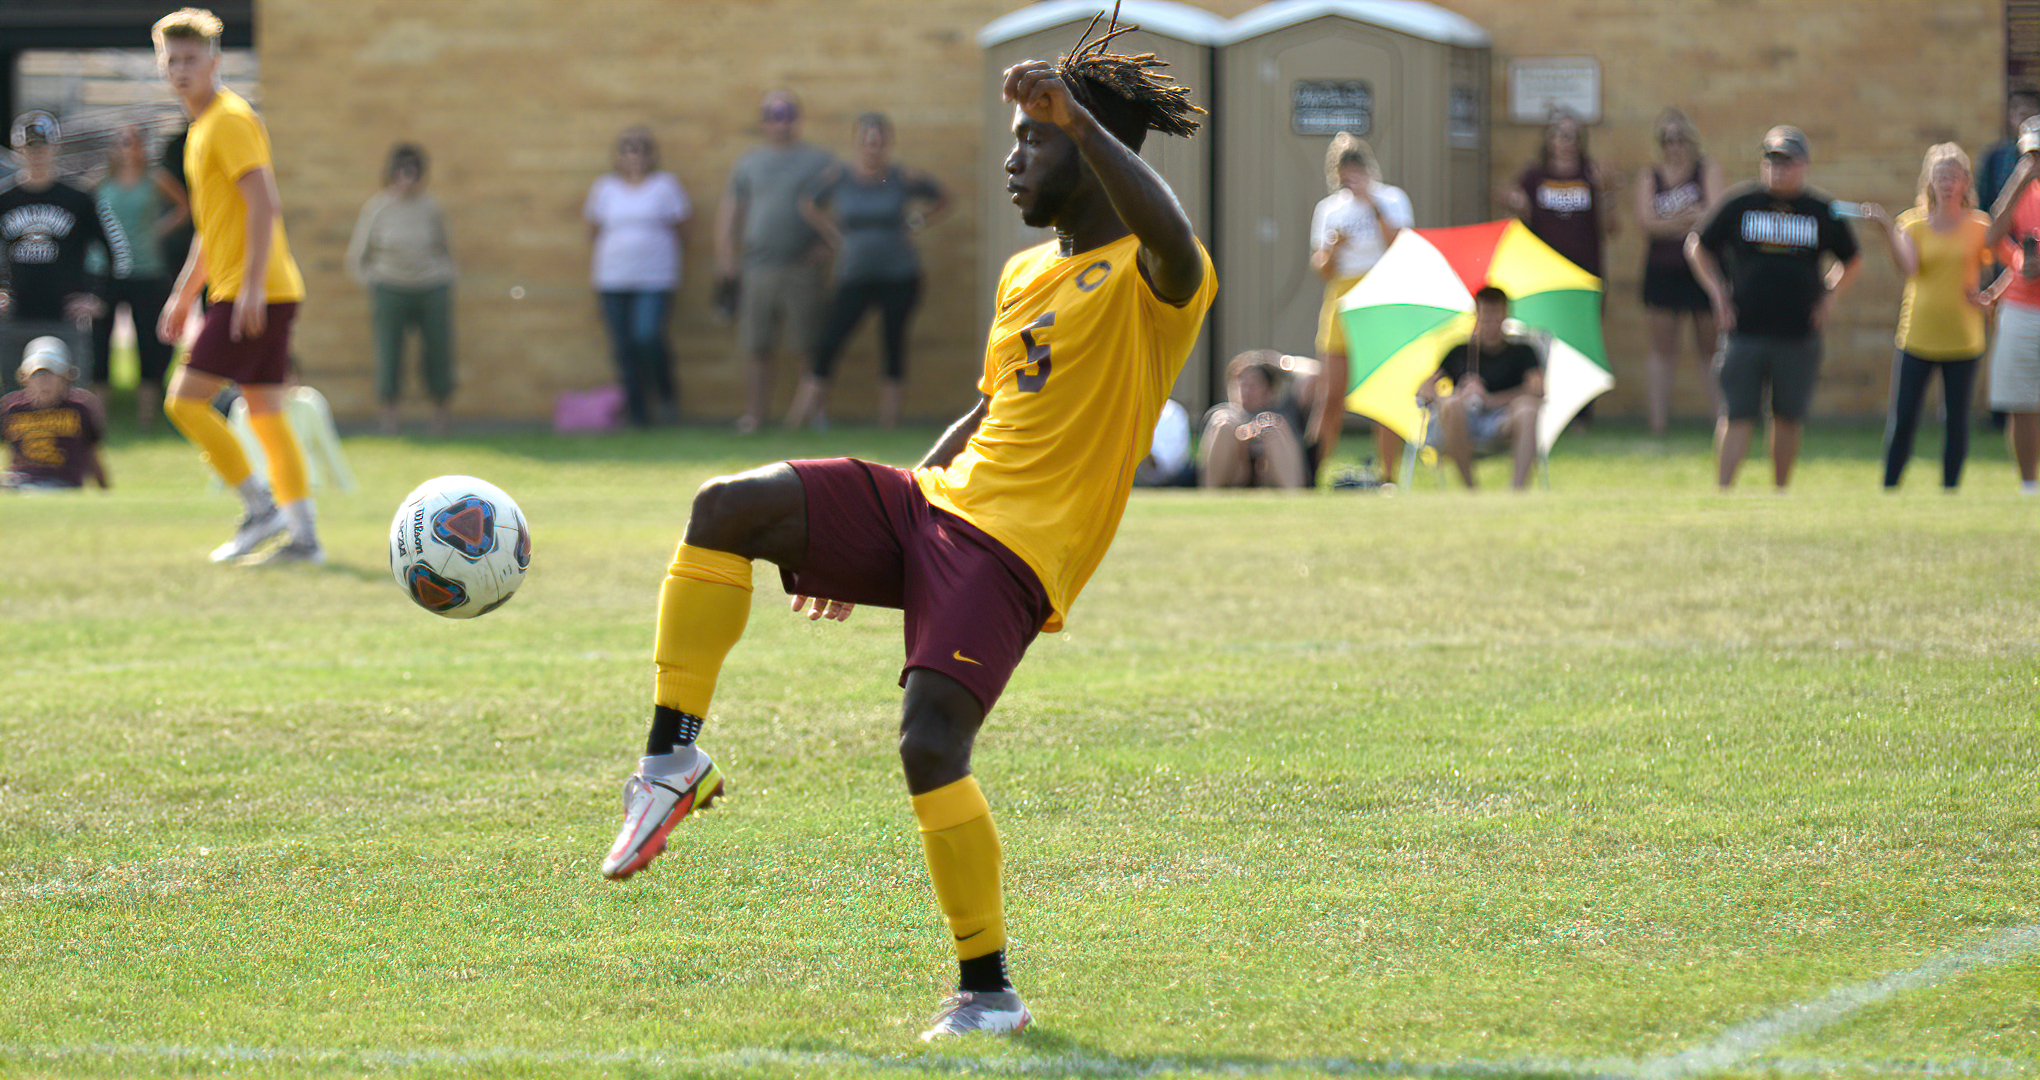 Telvin Vah scored the only Cobber goal in the team's game at Bethel. He has at least one goal in the last seven games and has 10 goals during that stretch.